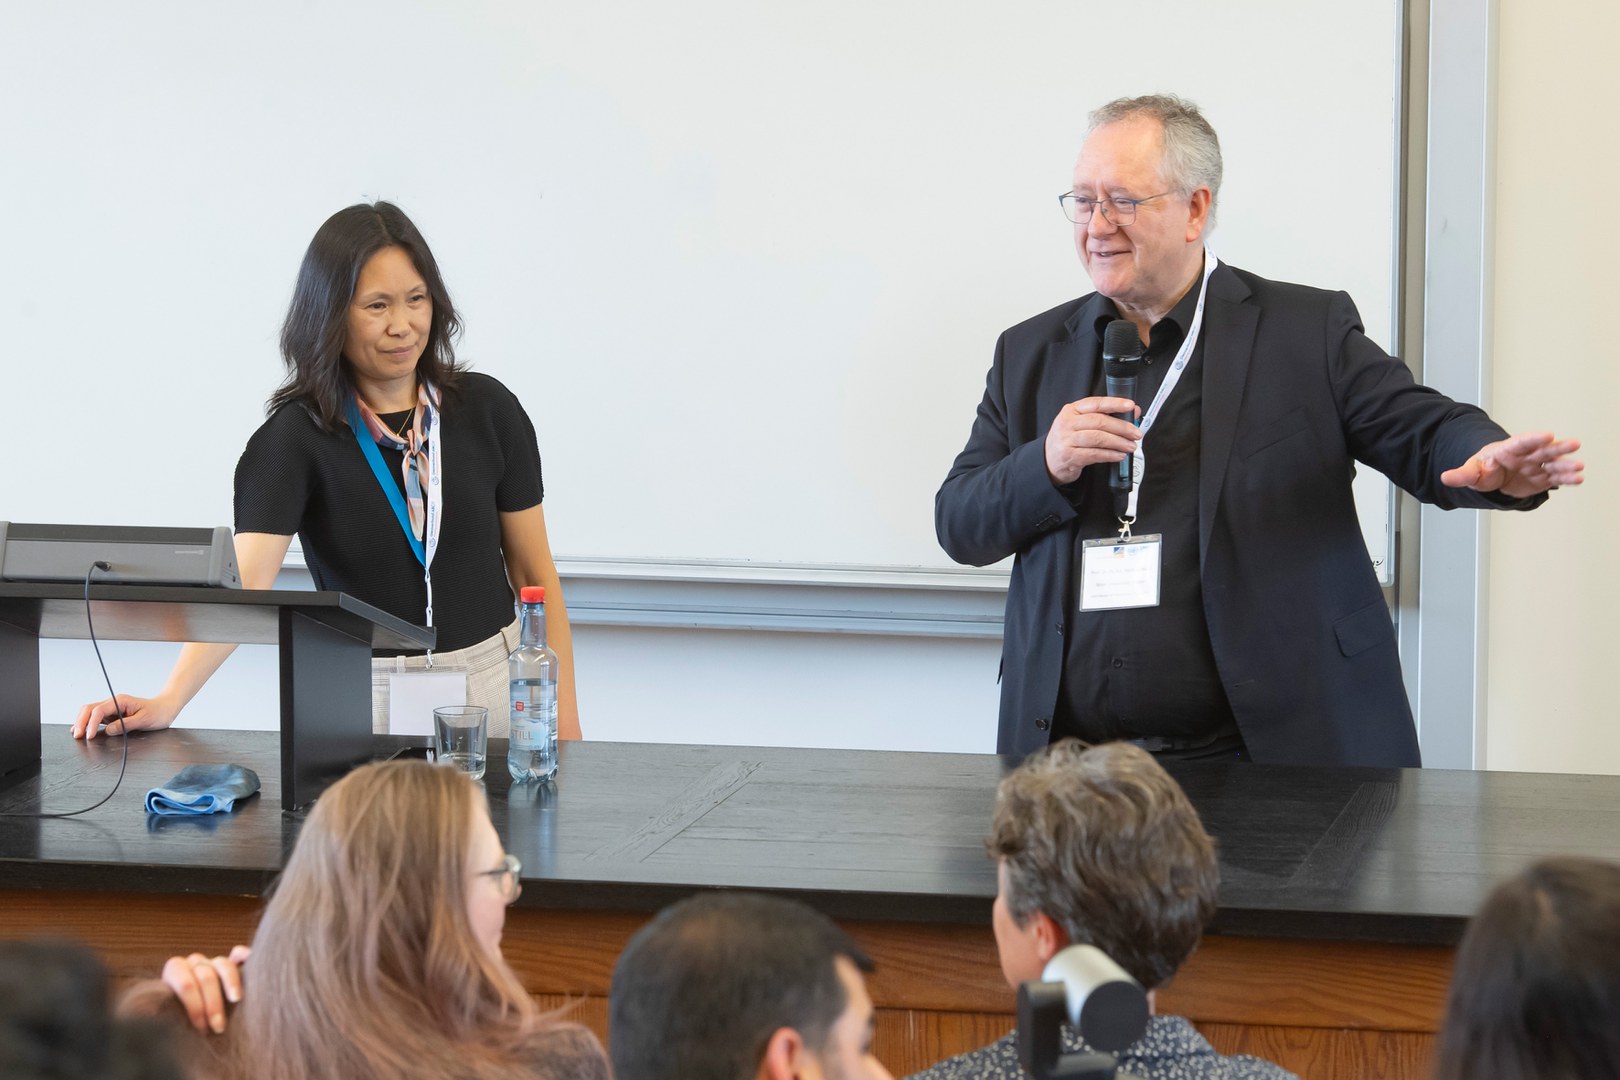 Rector of the University of Bonn, Prof. Dr. Dr. hc Michael Hoch, and Director of EHS at the United Nations University, Prof. Dr. Shen Xiaomeng, opened the event with a dialogue discussing the importance of the collaborative degree